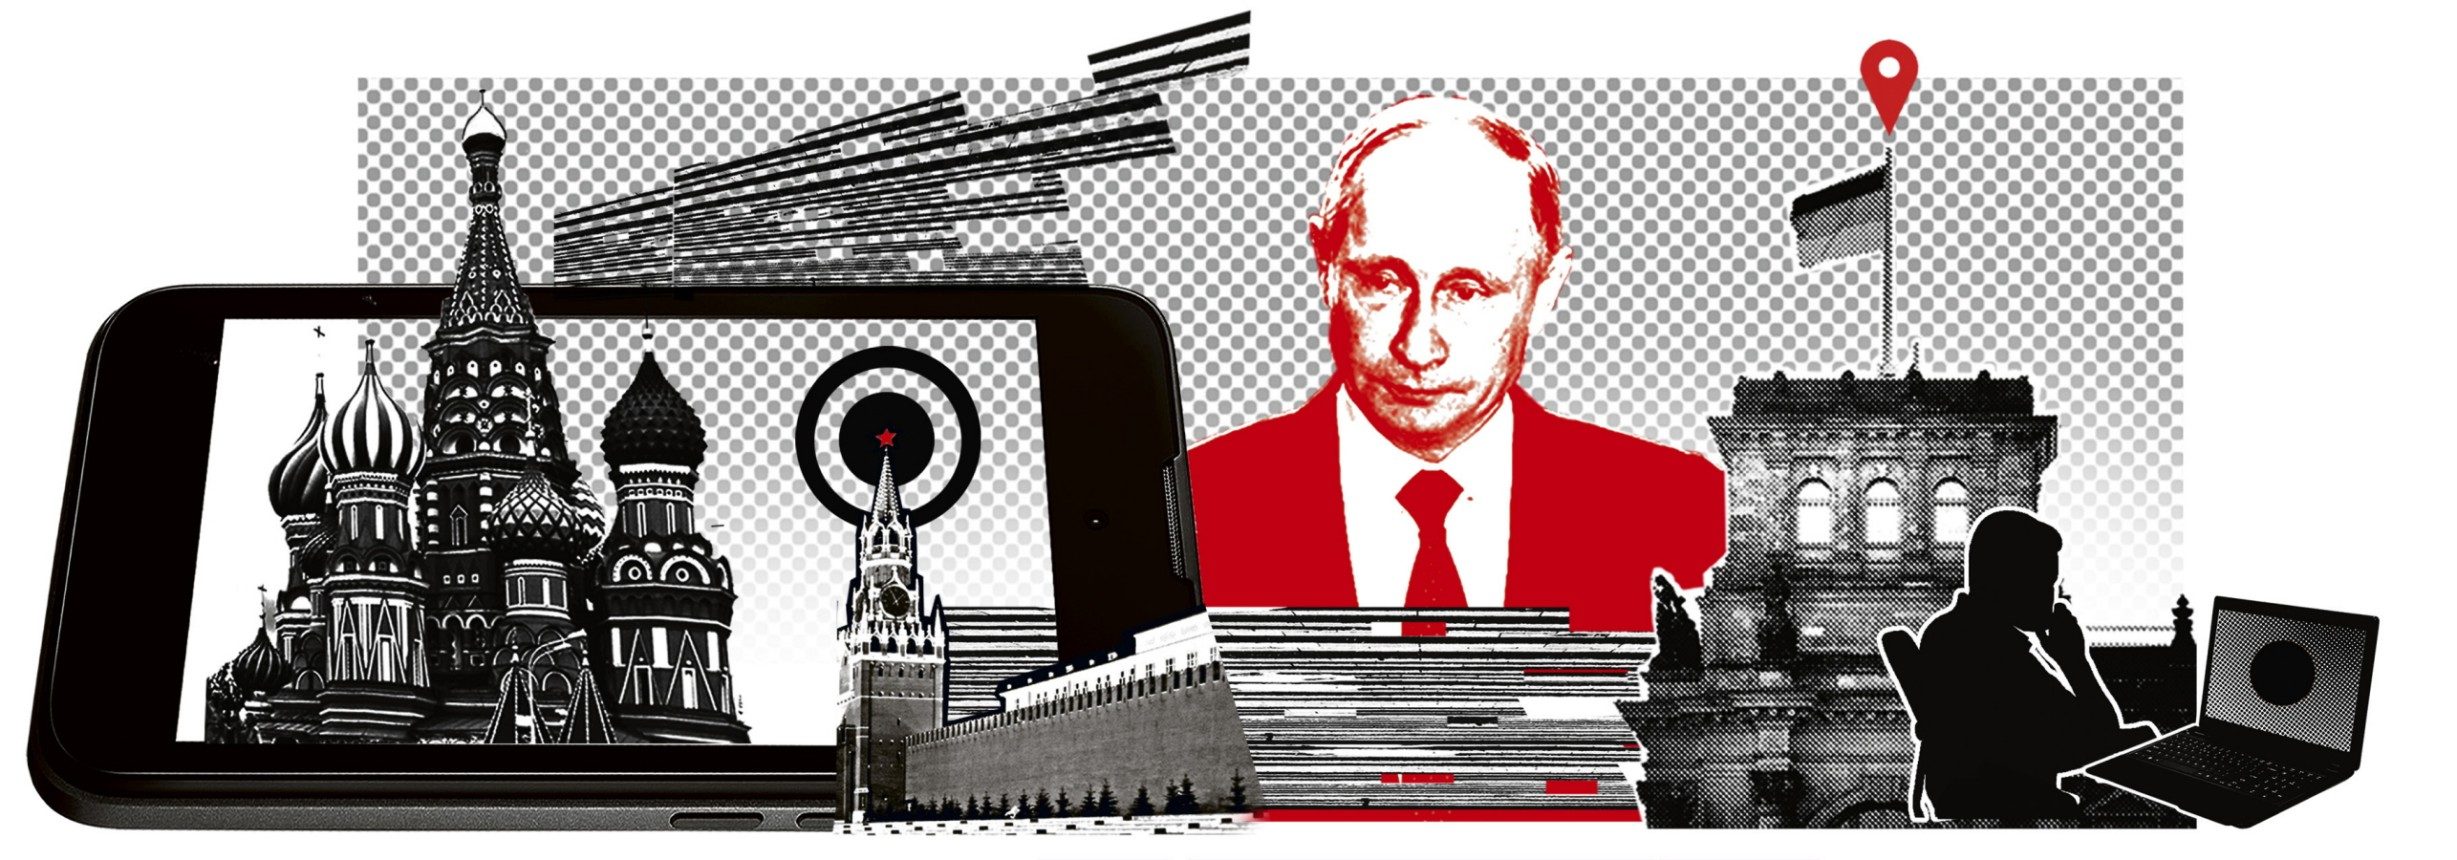 Graphic of Putin and cyber attacks